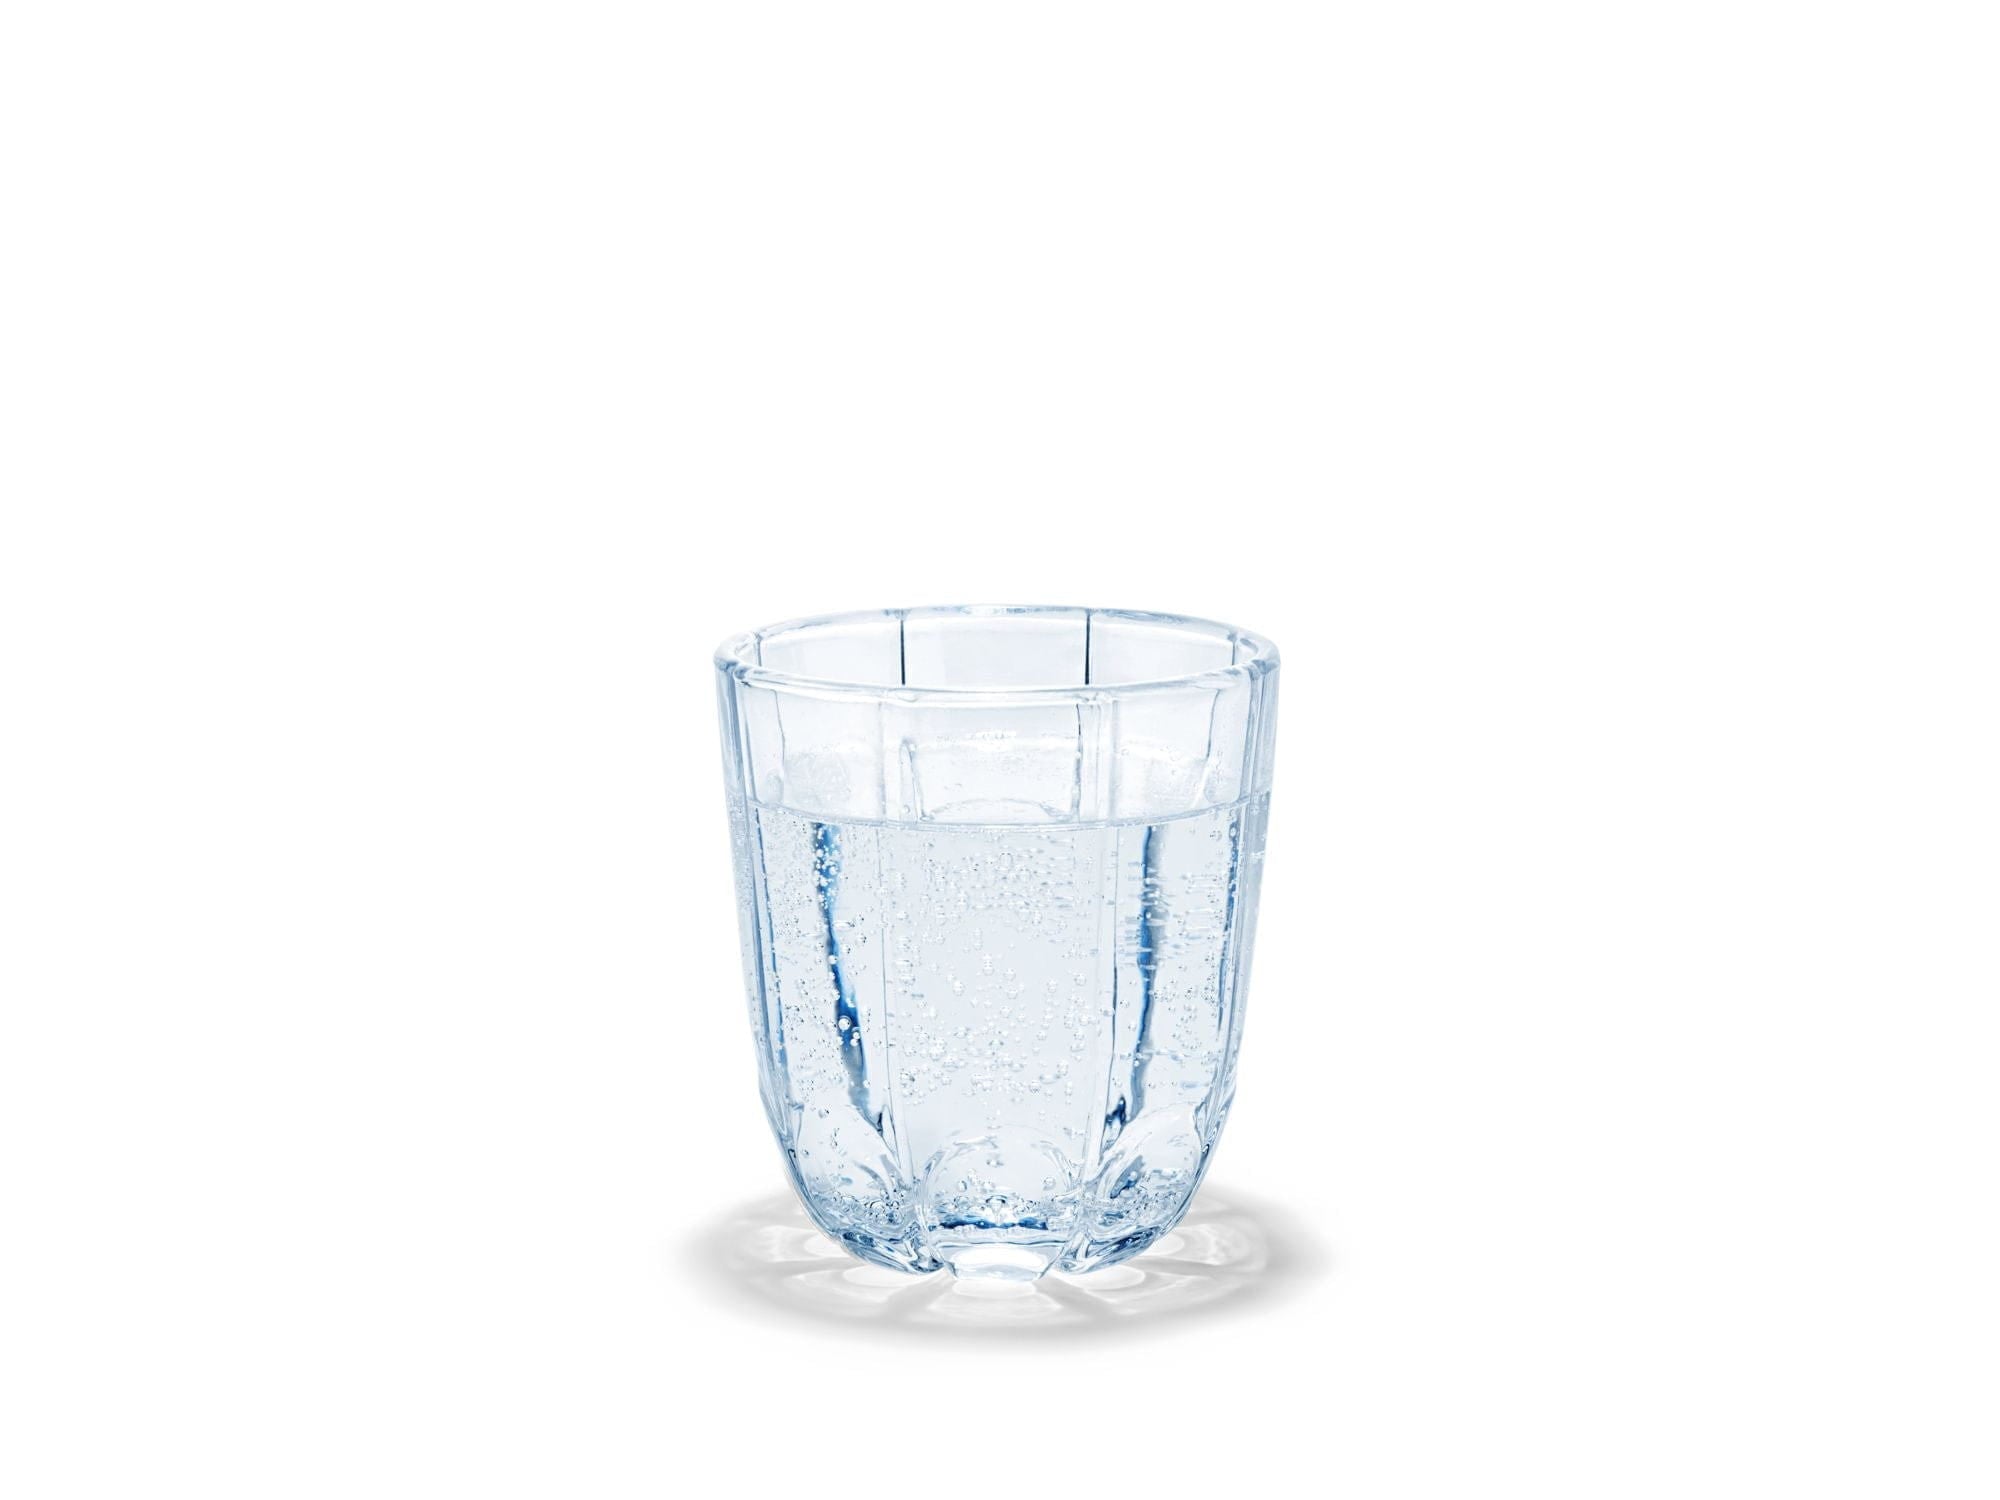 Holmegaard Lily Water Glass Set Of 2 320 Ml, Blue